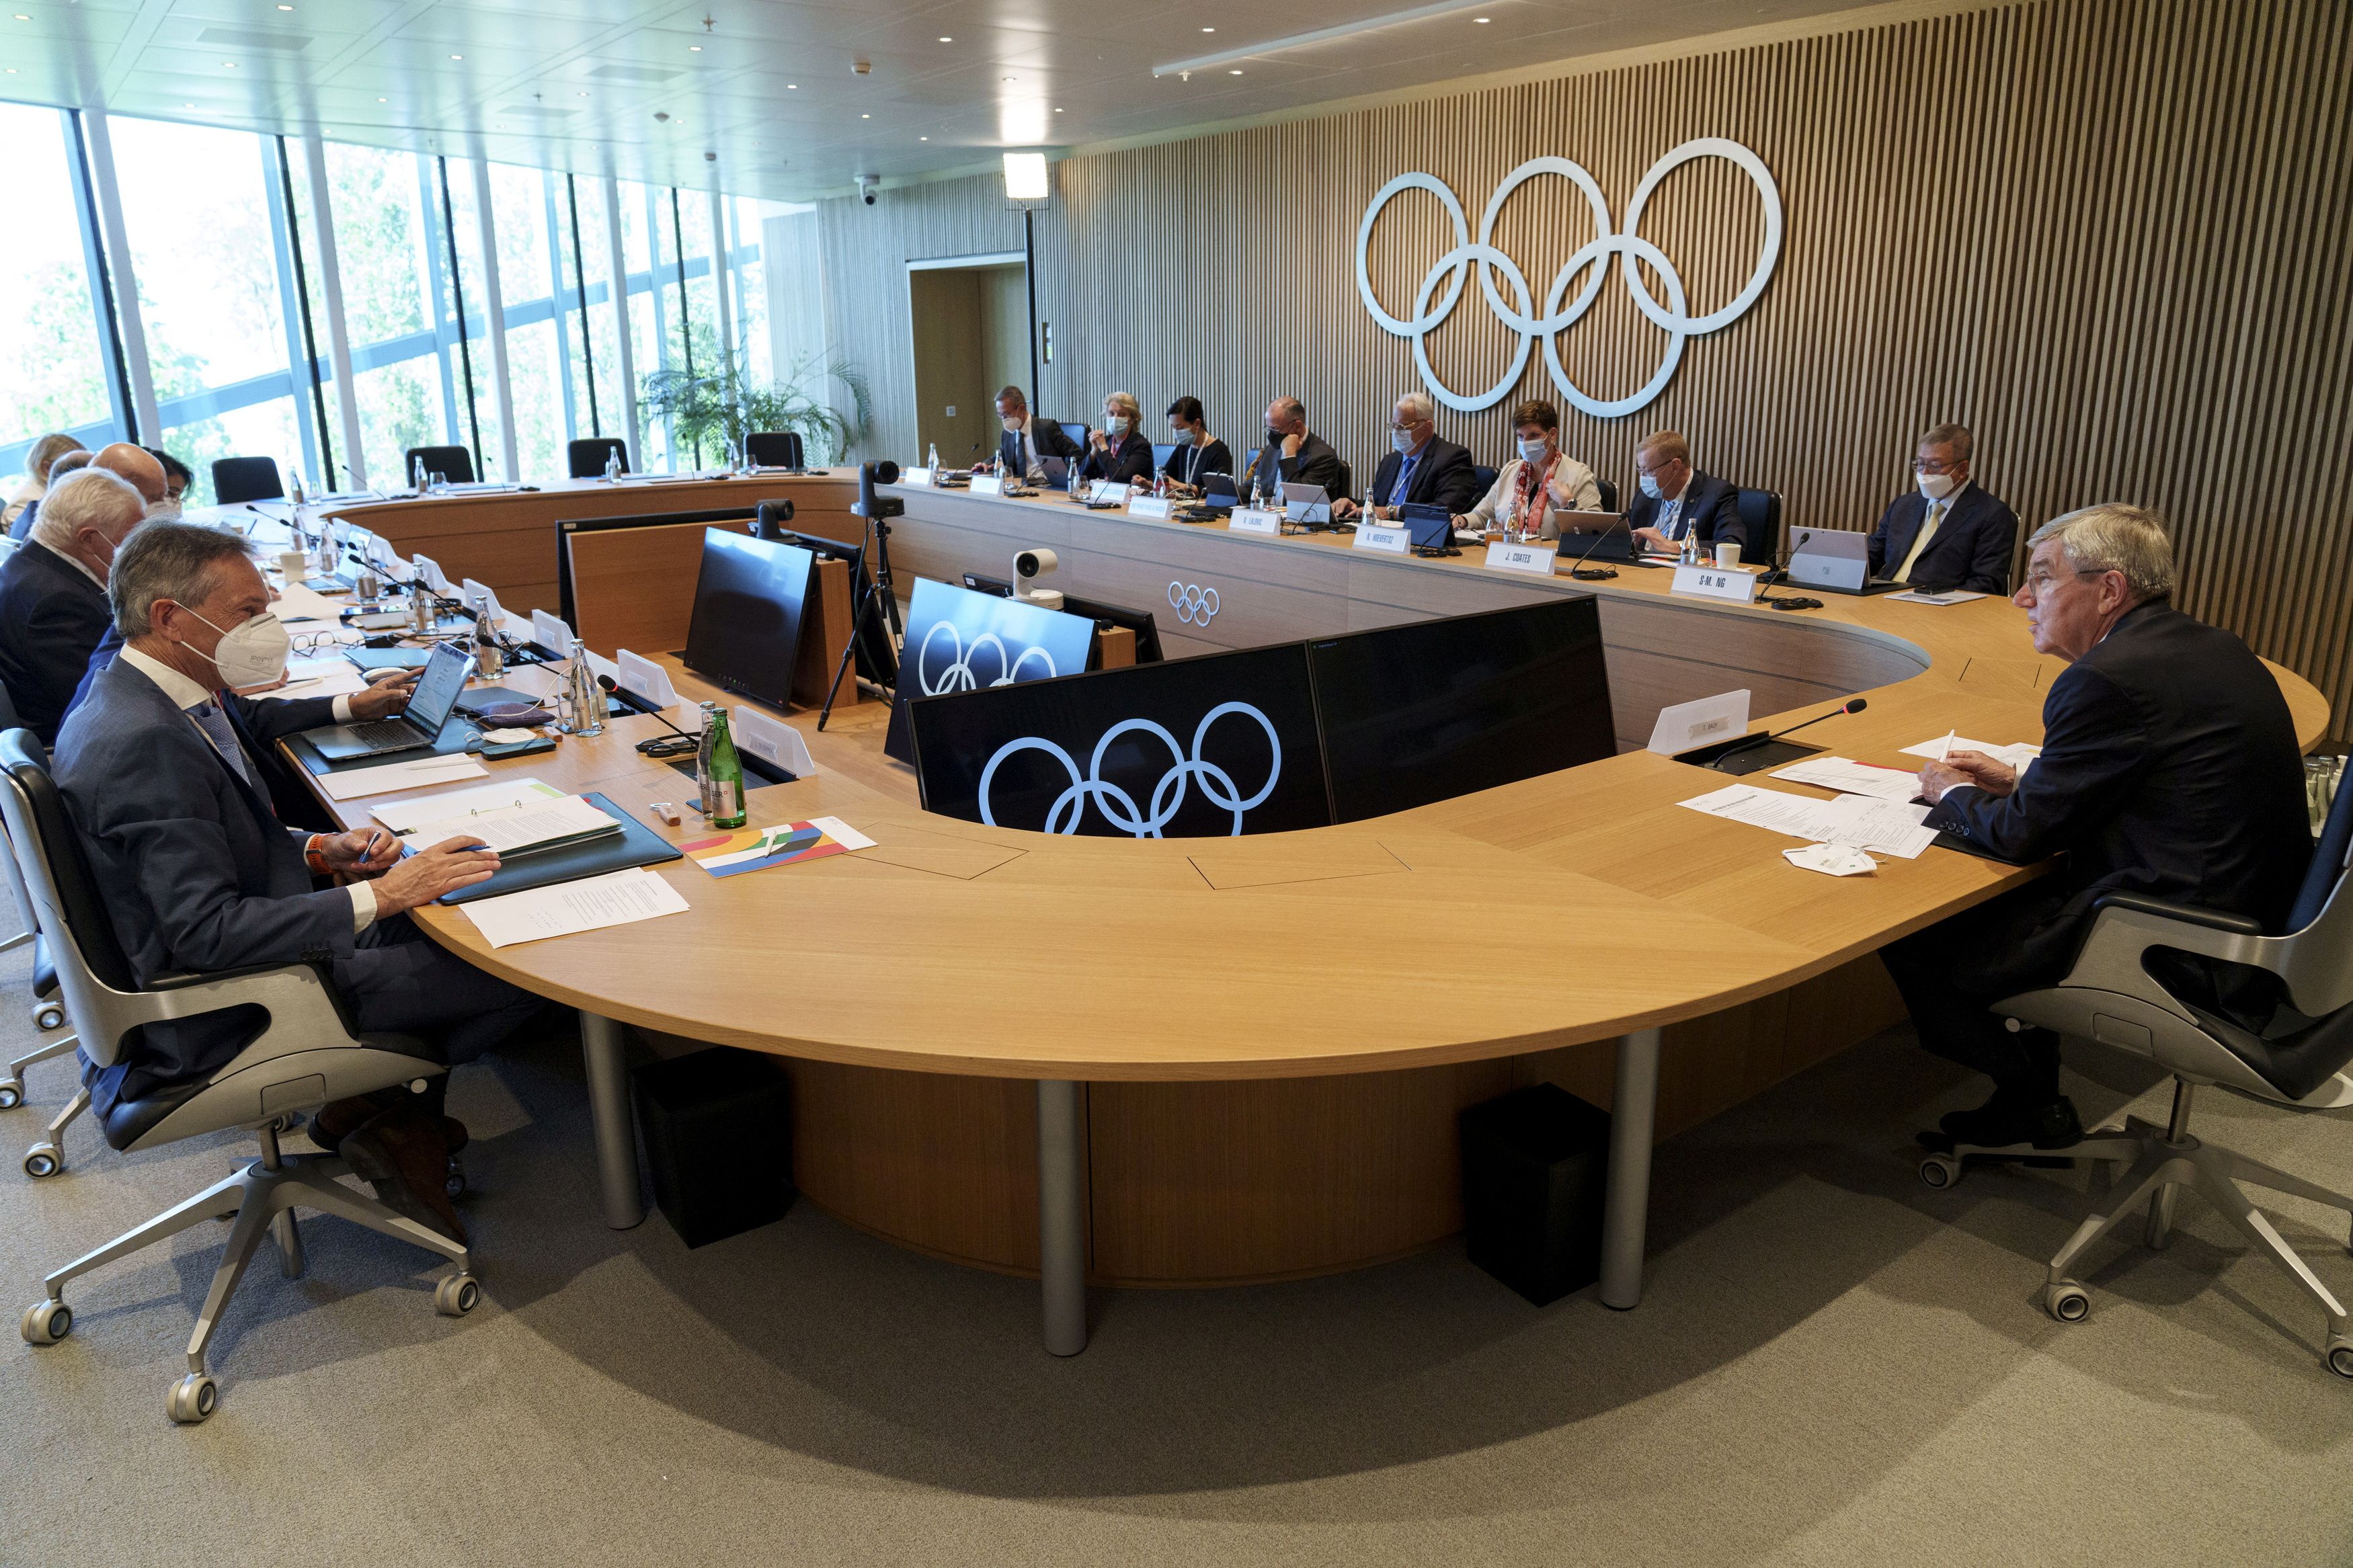 IOC President Bach holds the IOC Executive Board Meeting at Olympic House in Lausanne